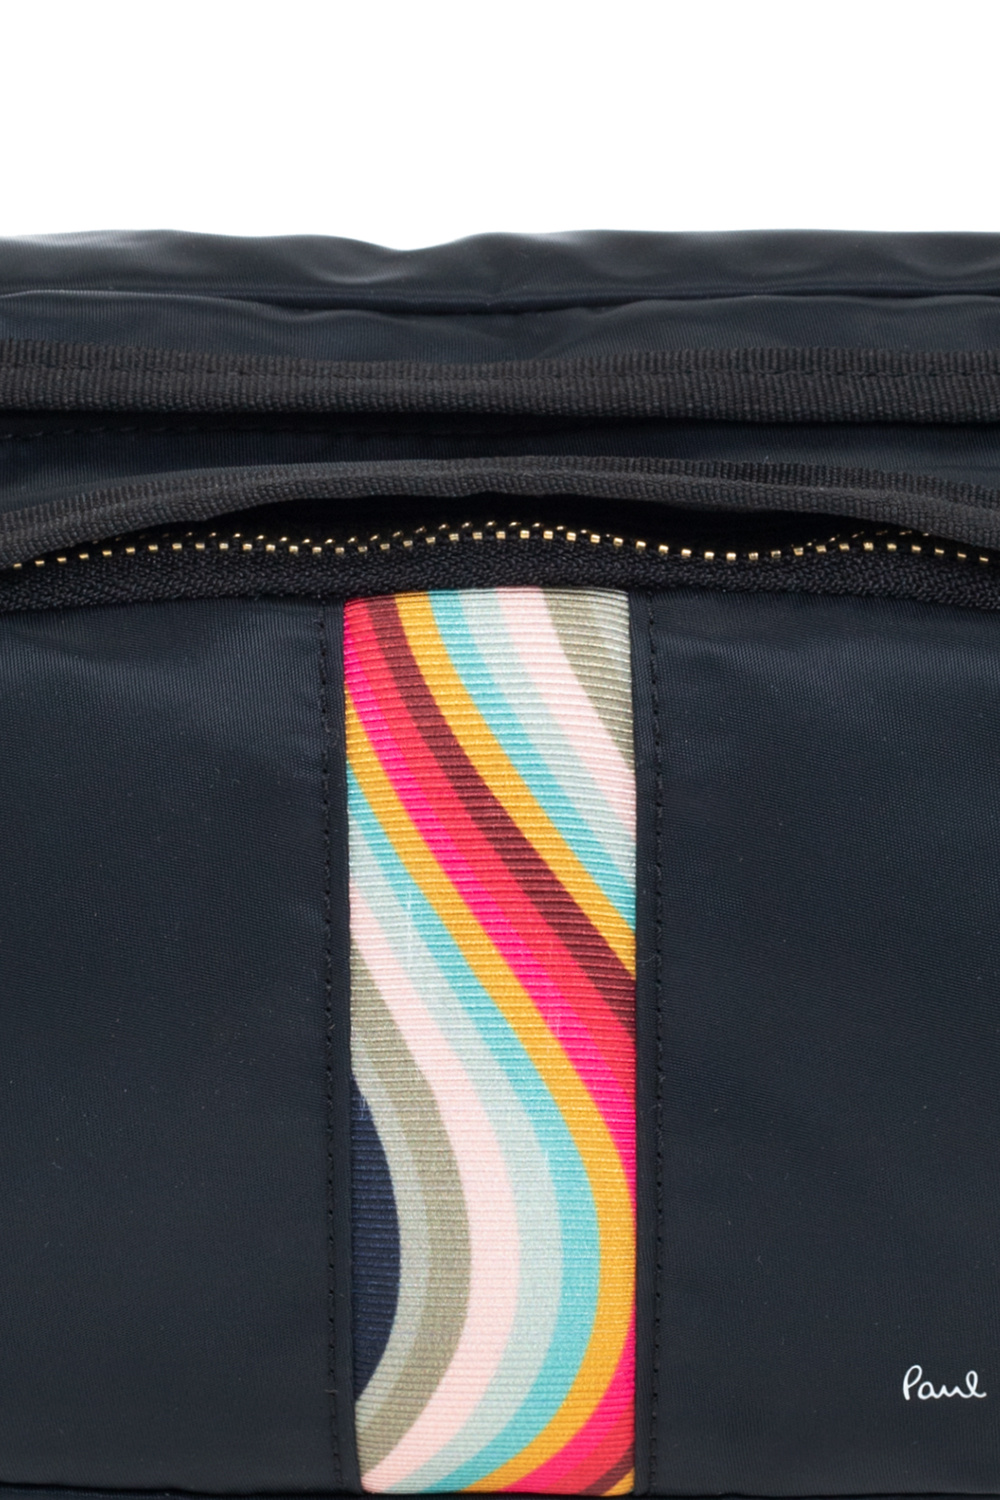 Paul Smith Belt bag check with logo